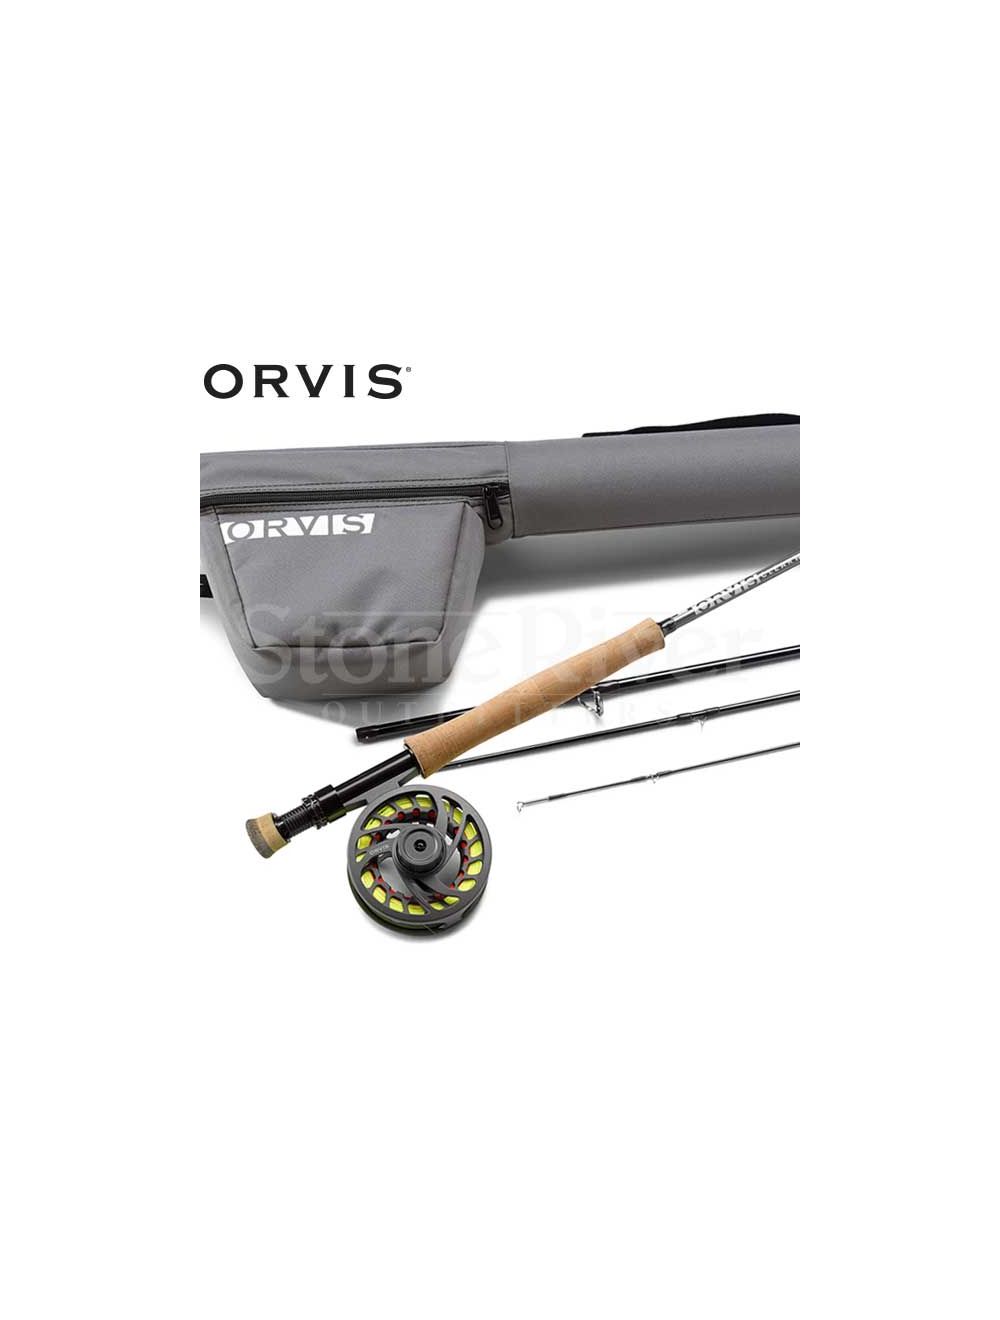 Combo - Euro Nymph 10' 3wt Orvis Clearwater Outfit